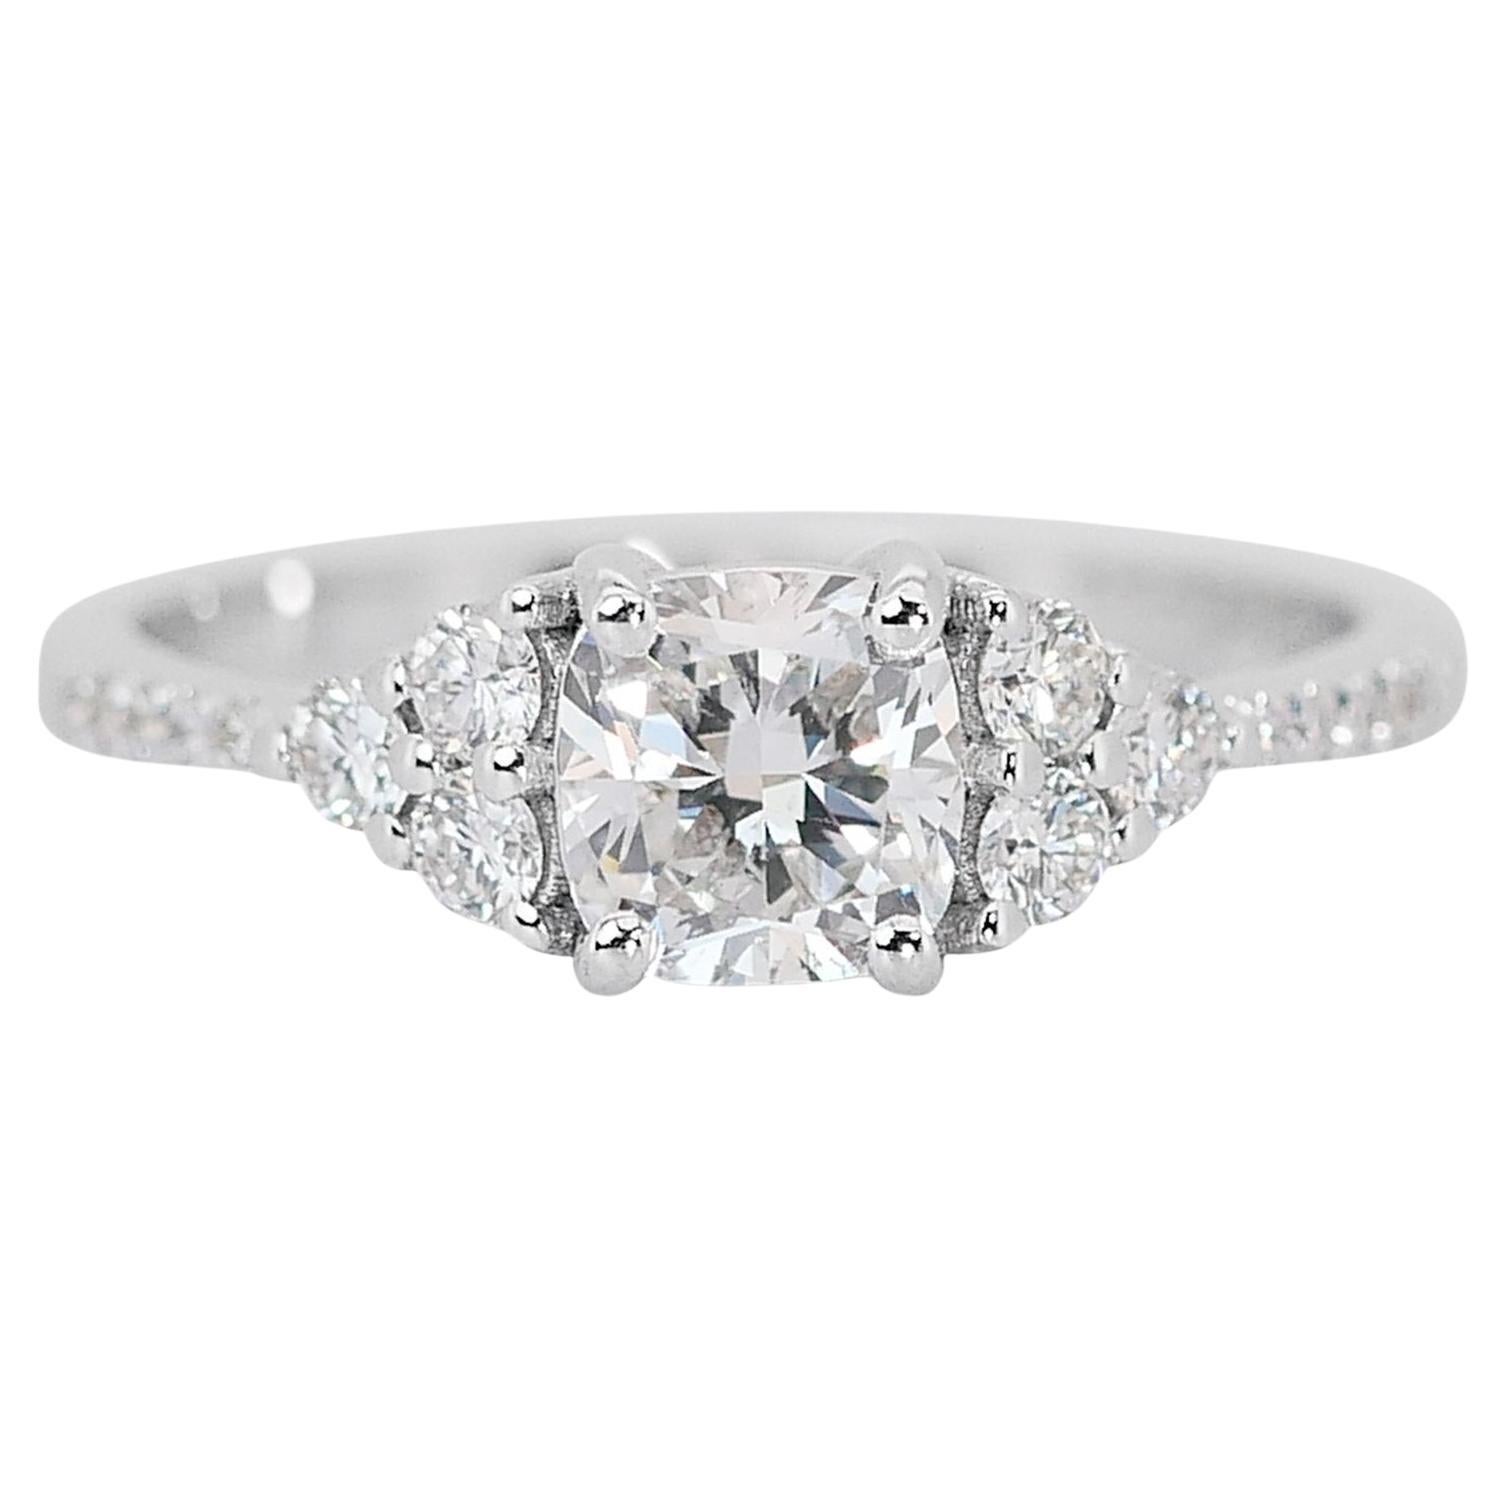 Magnificent 1.30ct Diamonds Pave Ring in 14k White Gold - GIA Certified